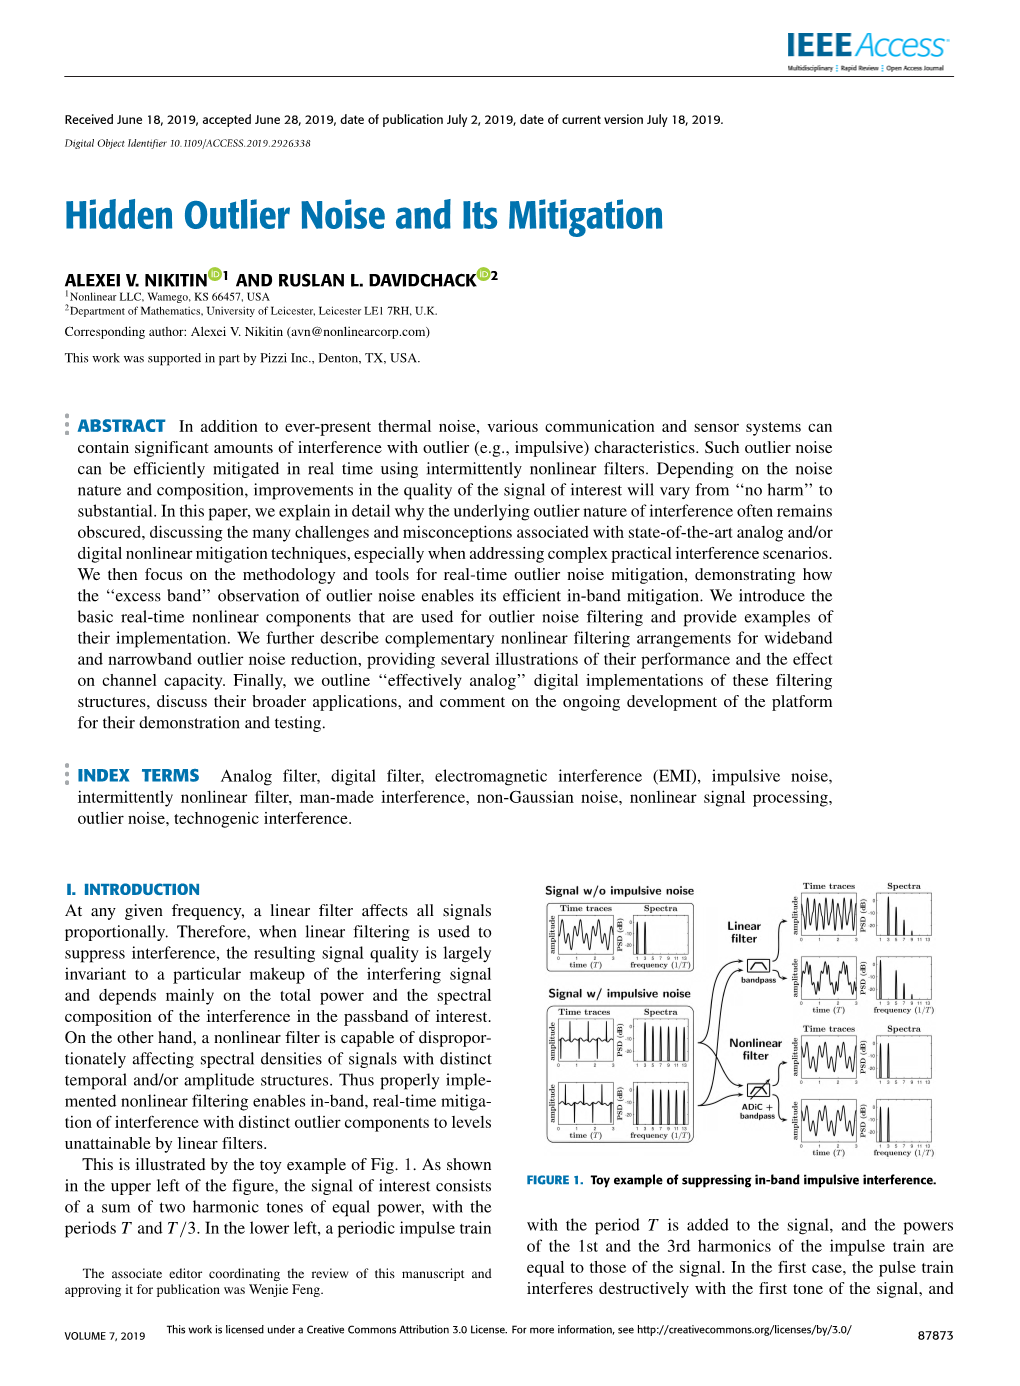 Hidden Outlier Noise and Its Mitigation